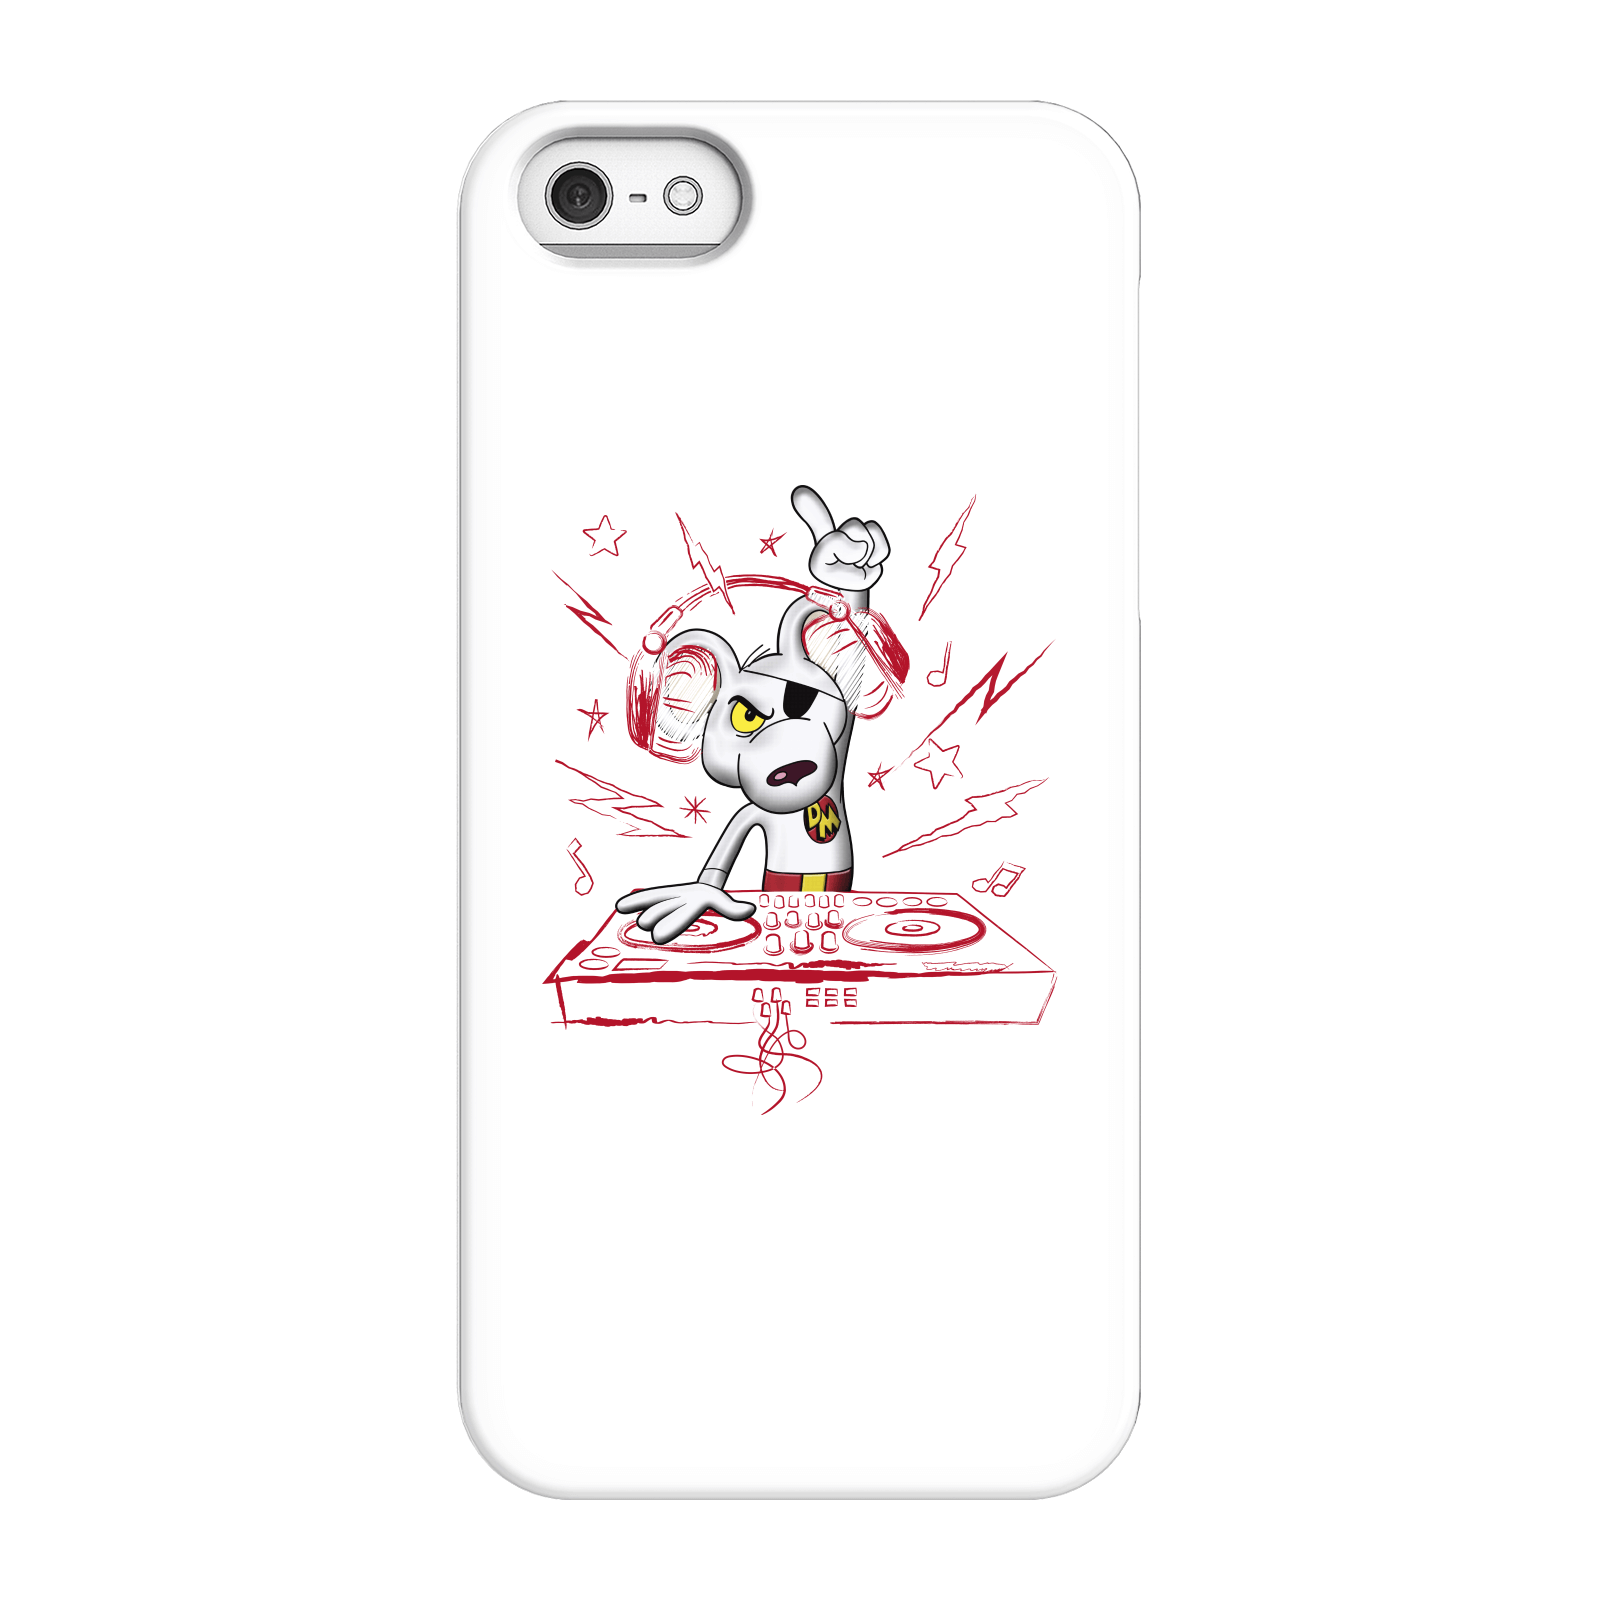 Danger Mouse DJ Phone Case for iPhone and Android - iPhone 5/5s - Snap Case - Matte